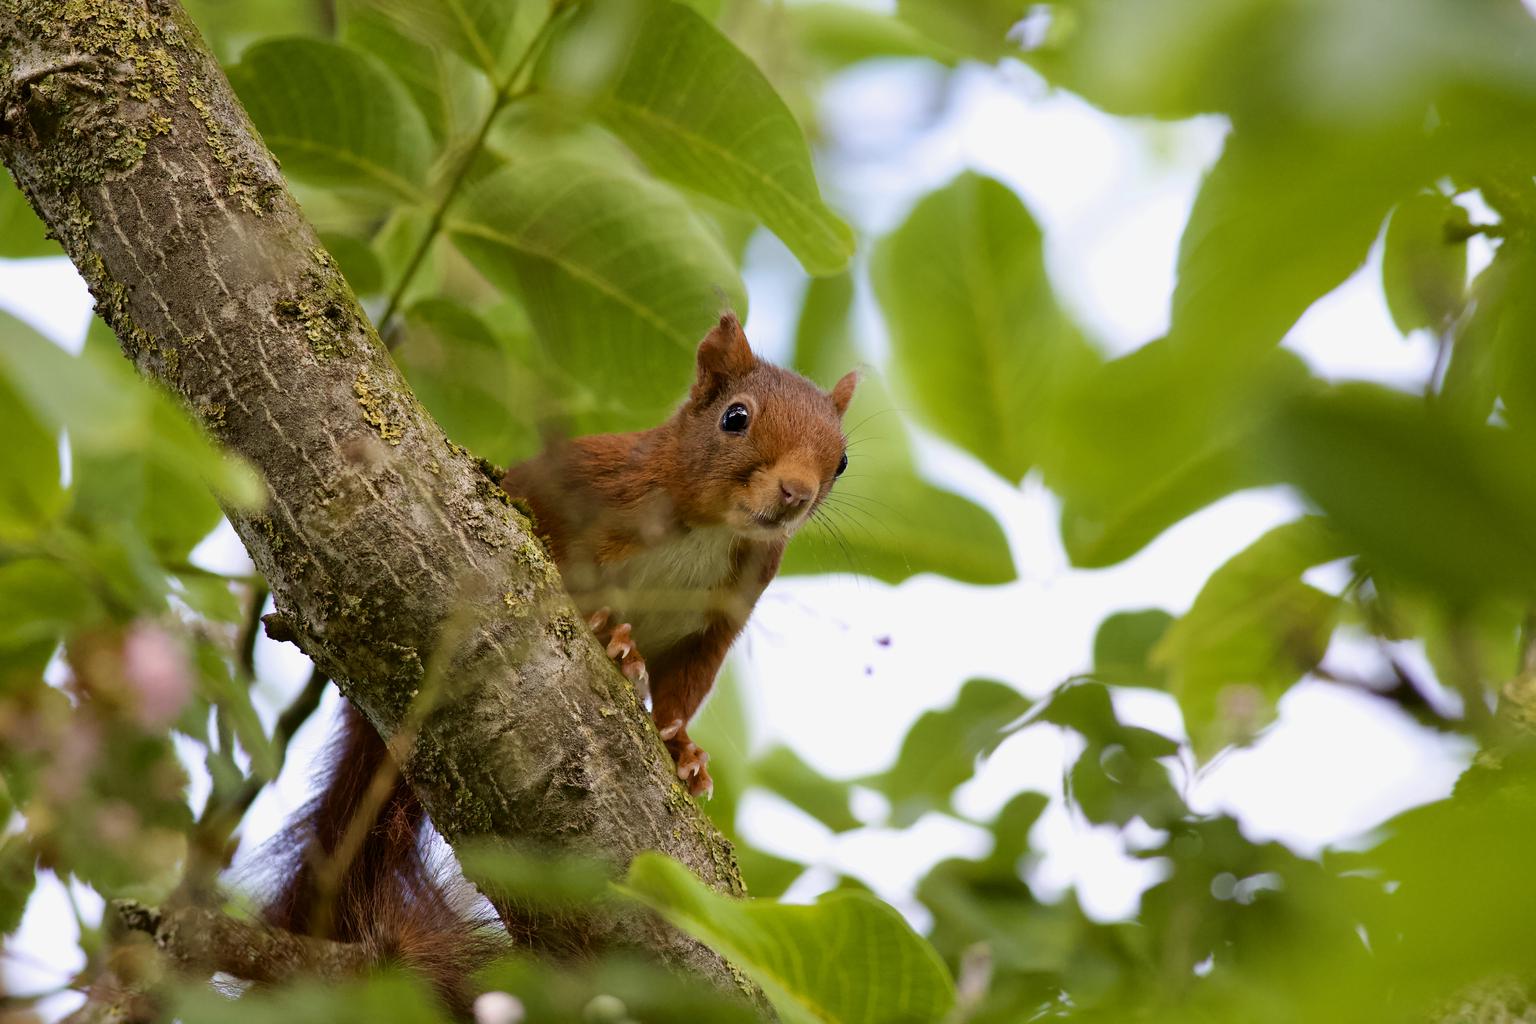 A curious red squirrel early in the morning